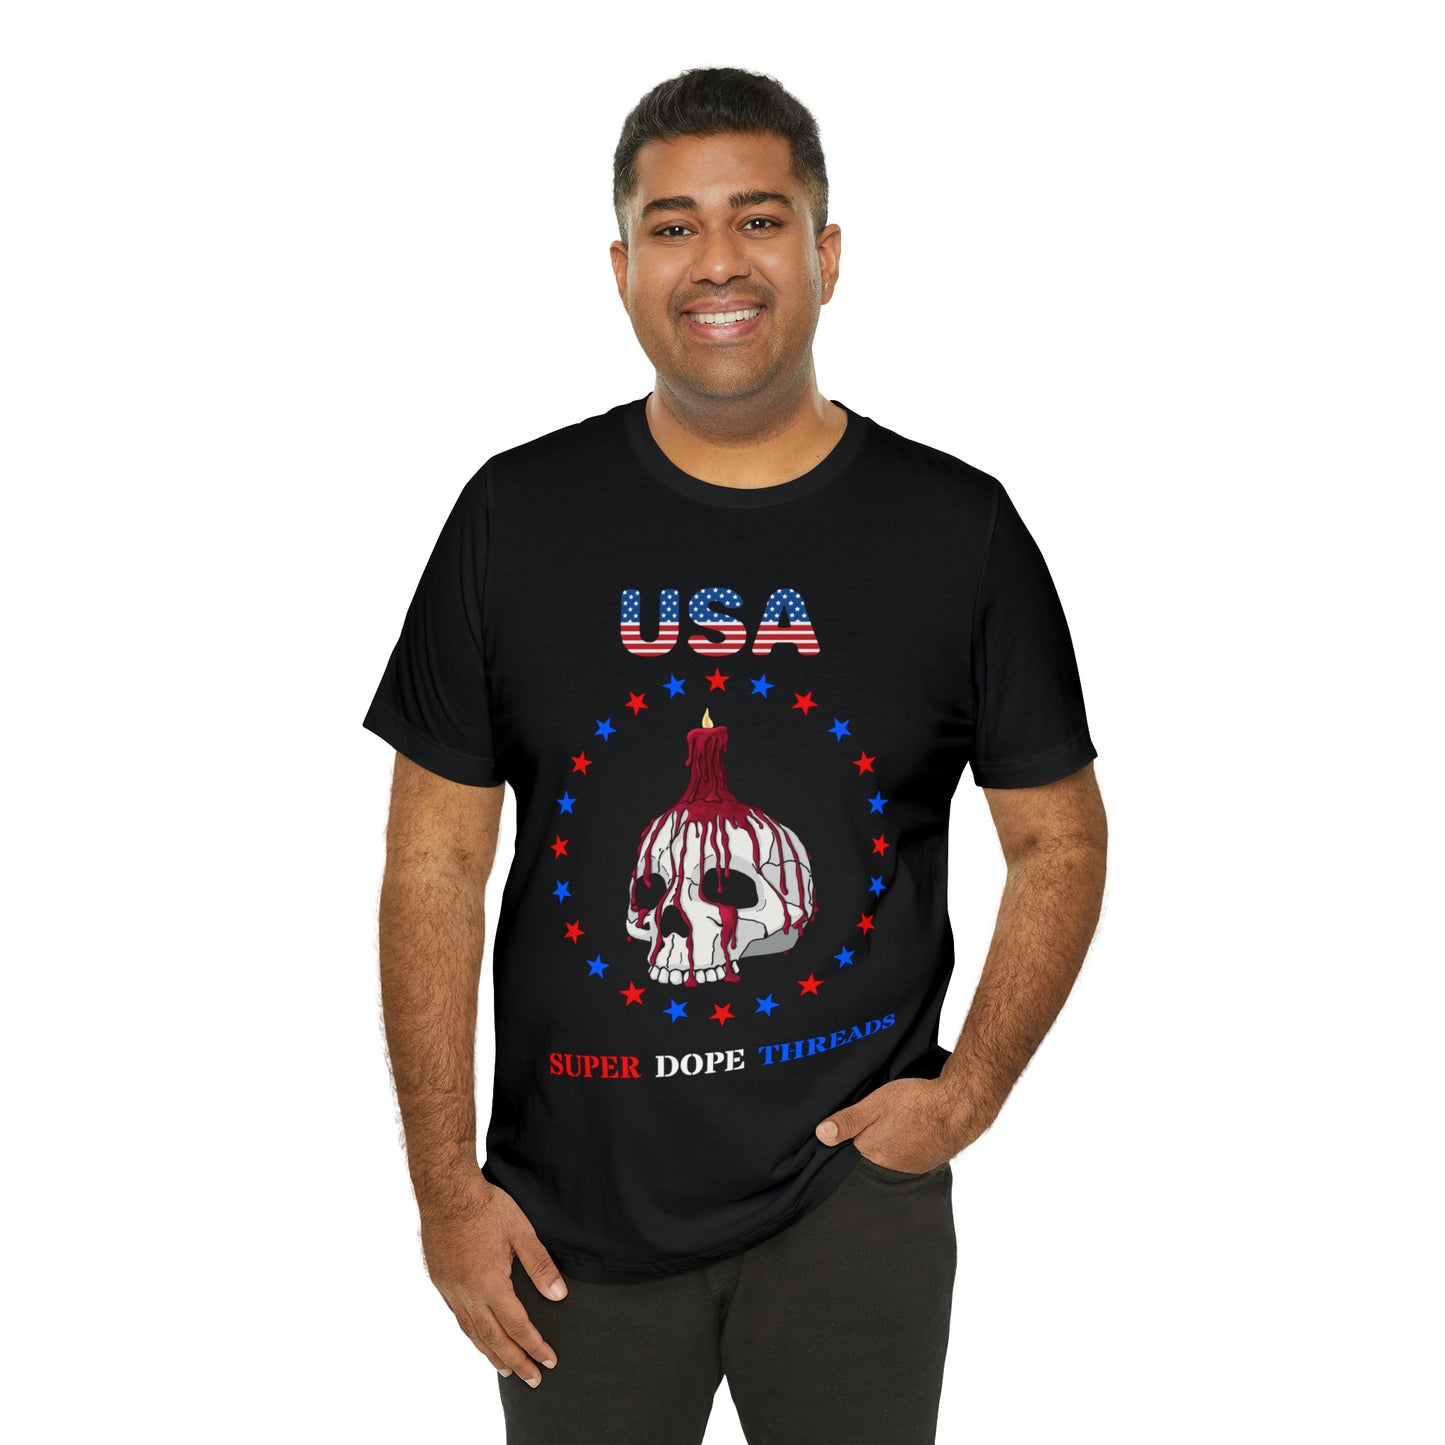 Super Dope Threads - 4th of July Tee